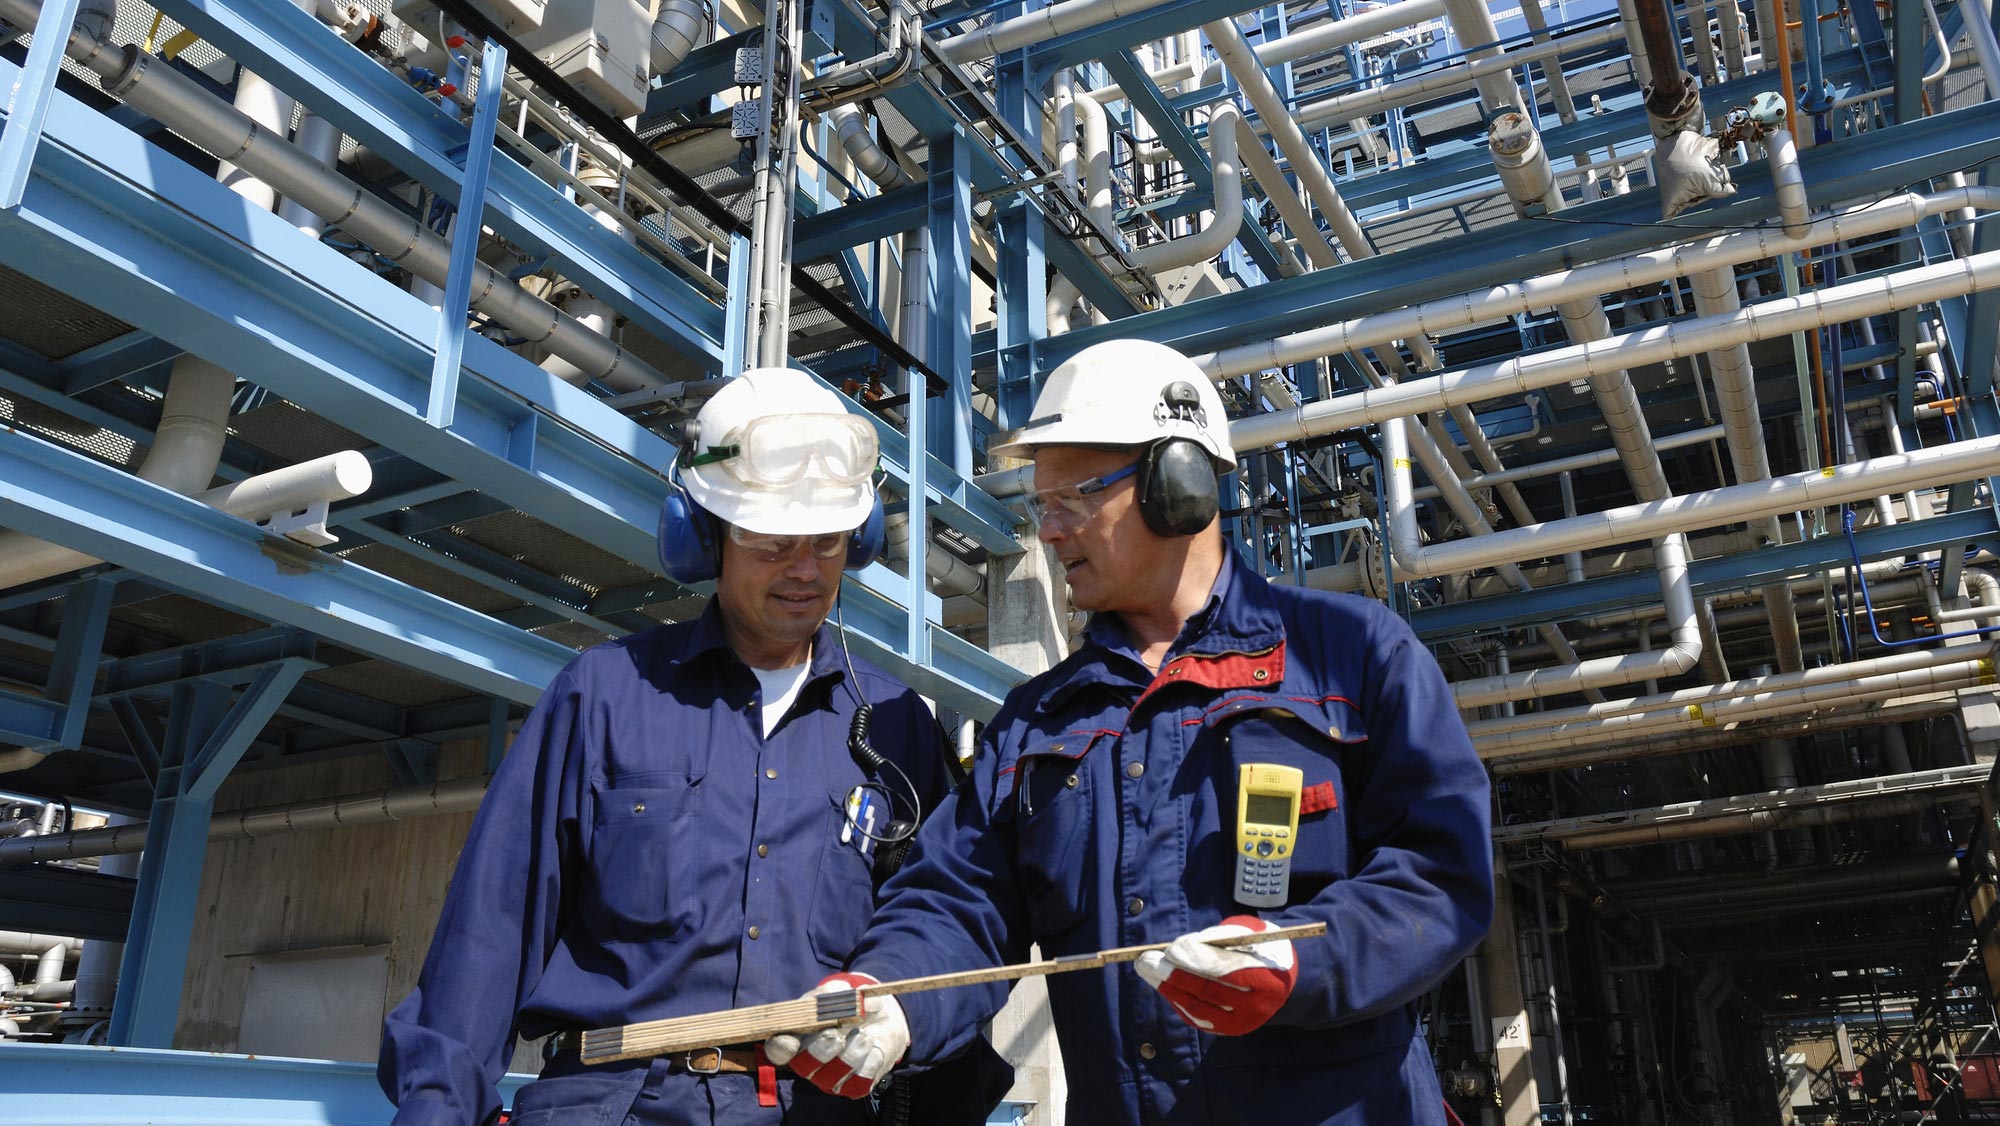 Two men wearing white construction hats, noise-canceling earmuffs, and blue jumpsuit's examine a ruler as they stand before an oil refinery.